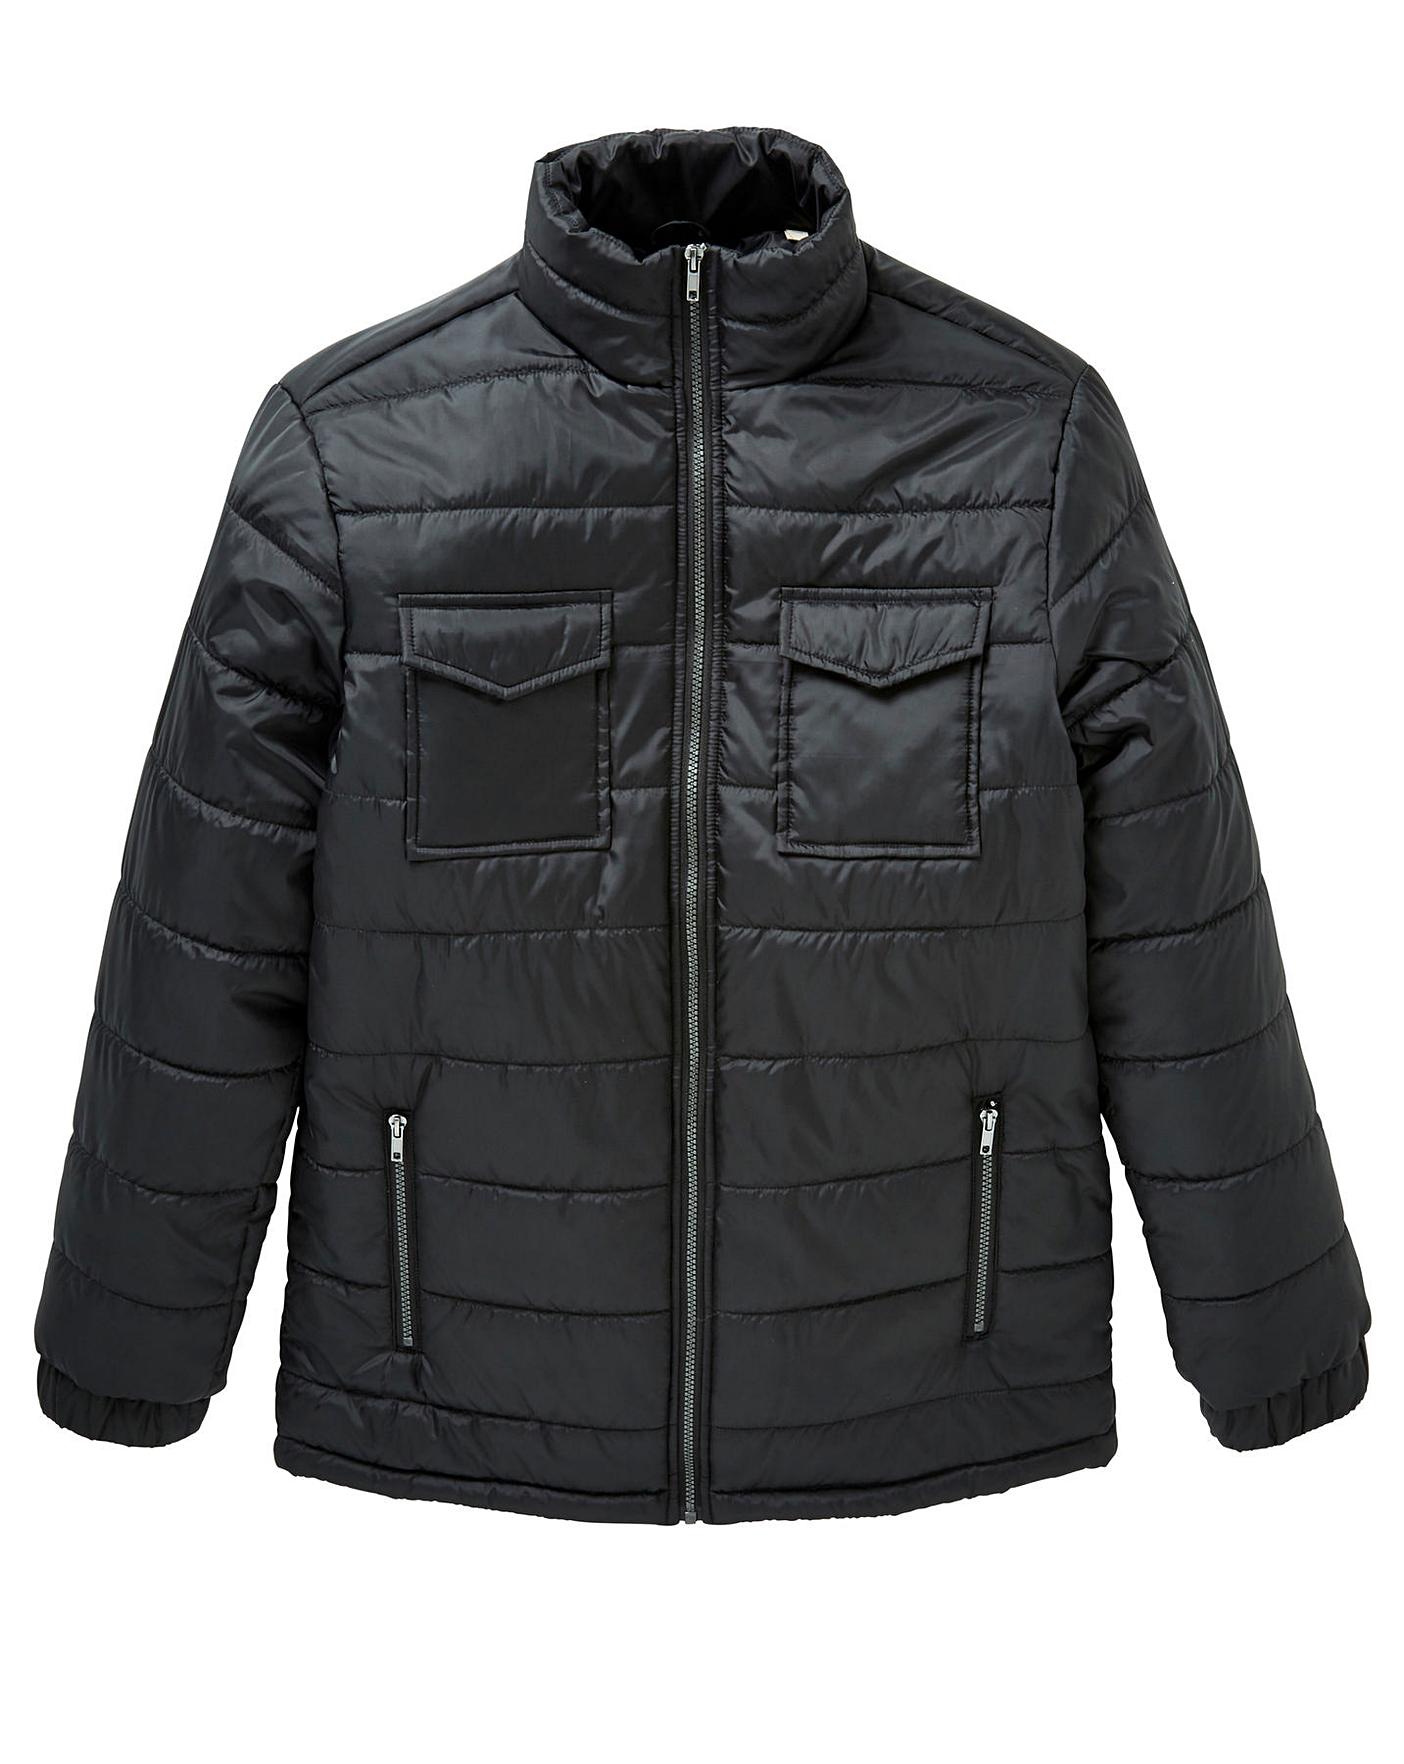 WILLIAMS & BROWN Black Padded Jacket | Crazy Clearance